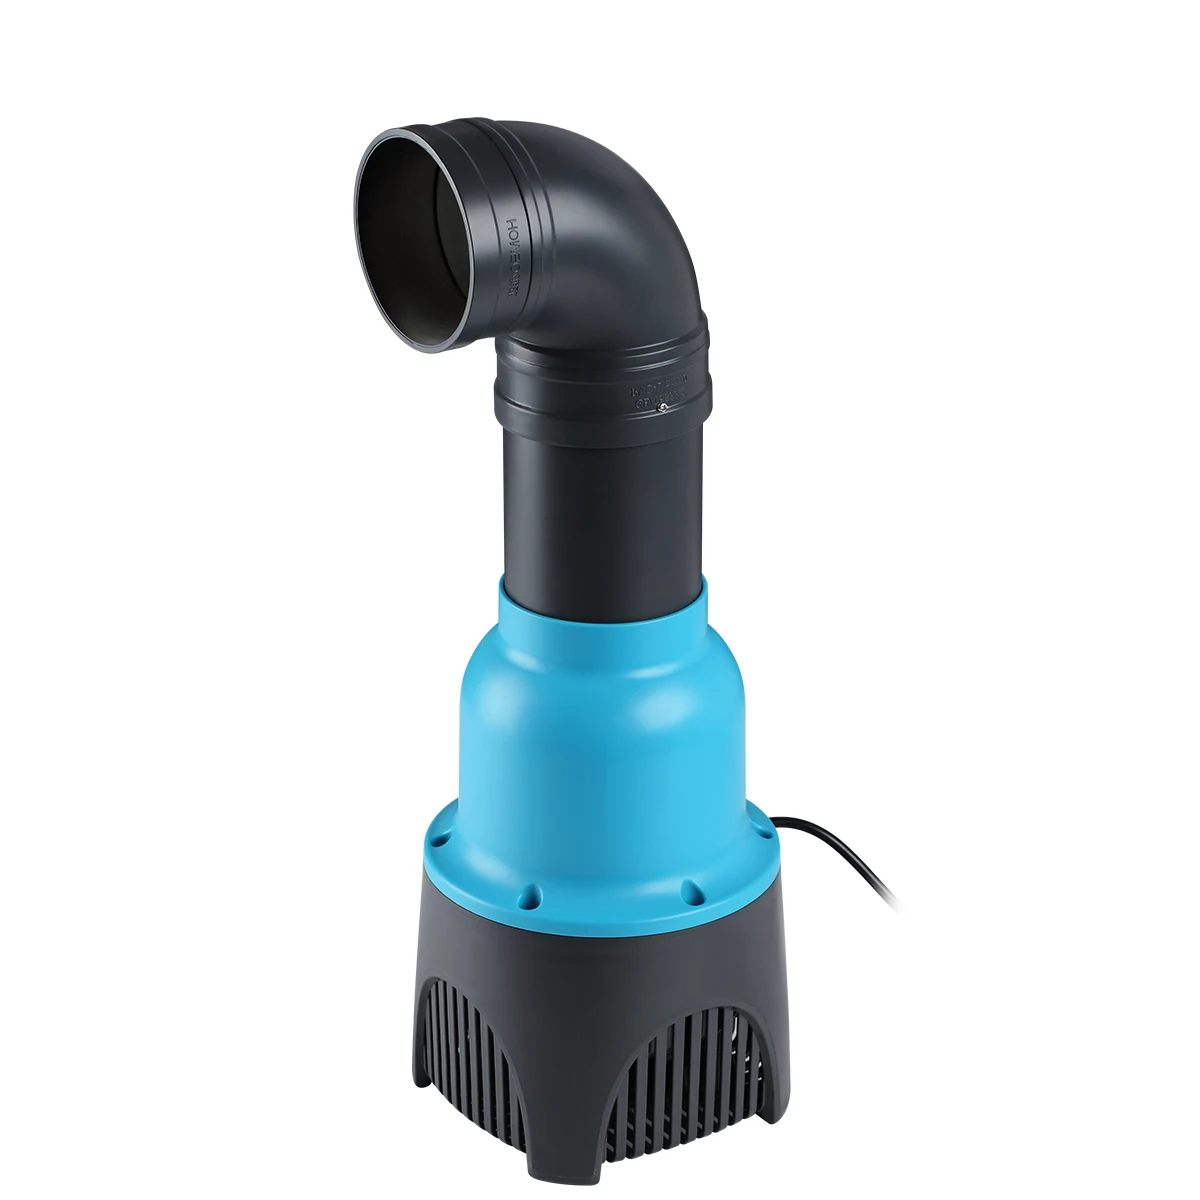 Variable Frequency Submersible Pump Adjustable Speed Koi Pond Water Filter Circulation System Aquarium Waterfall Filter